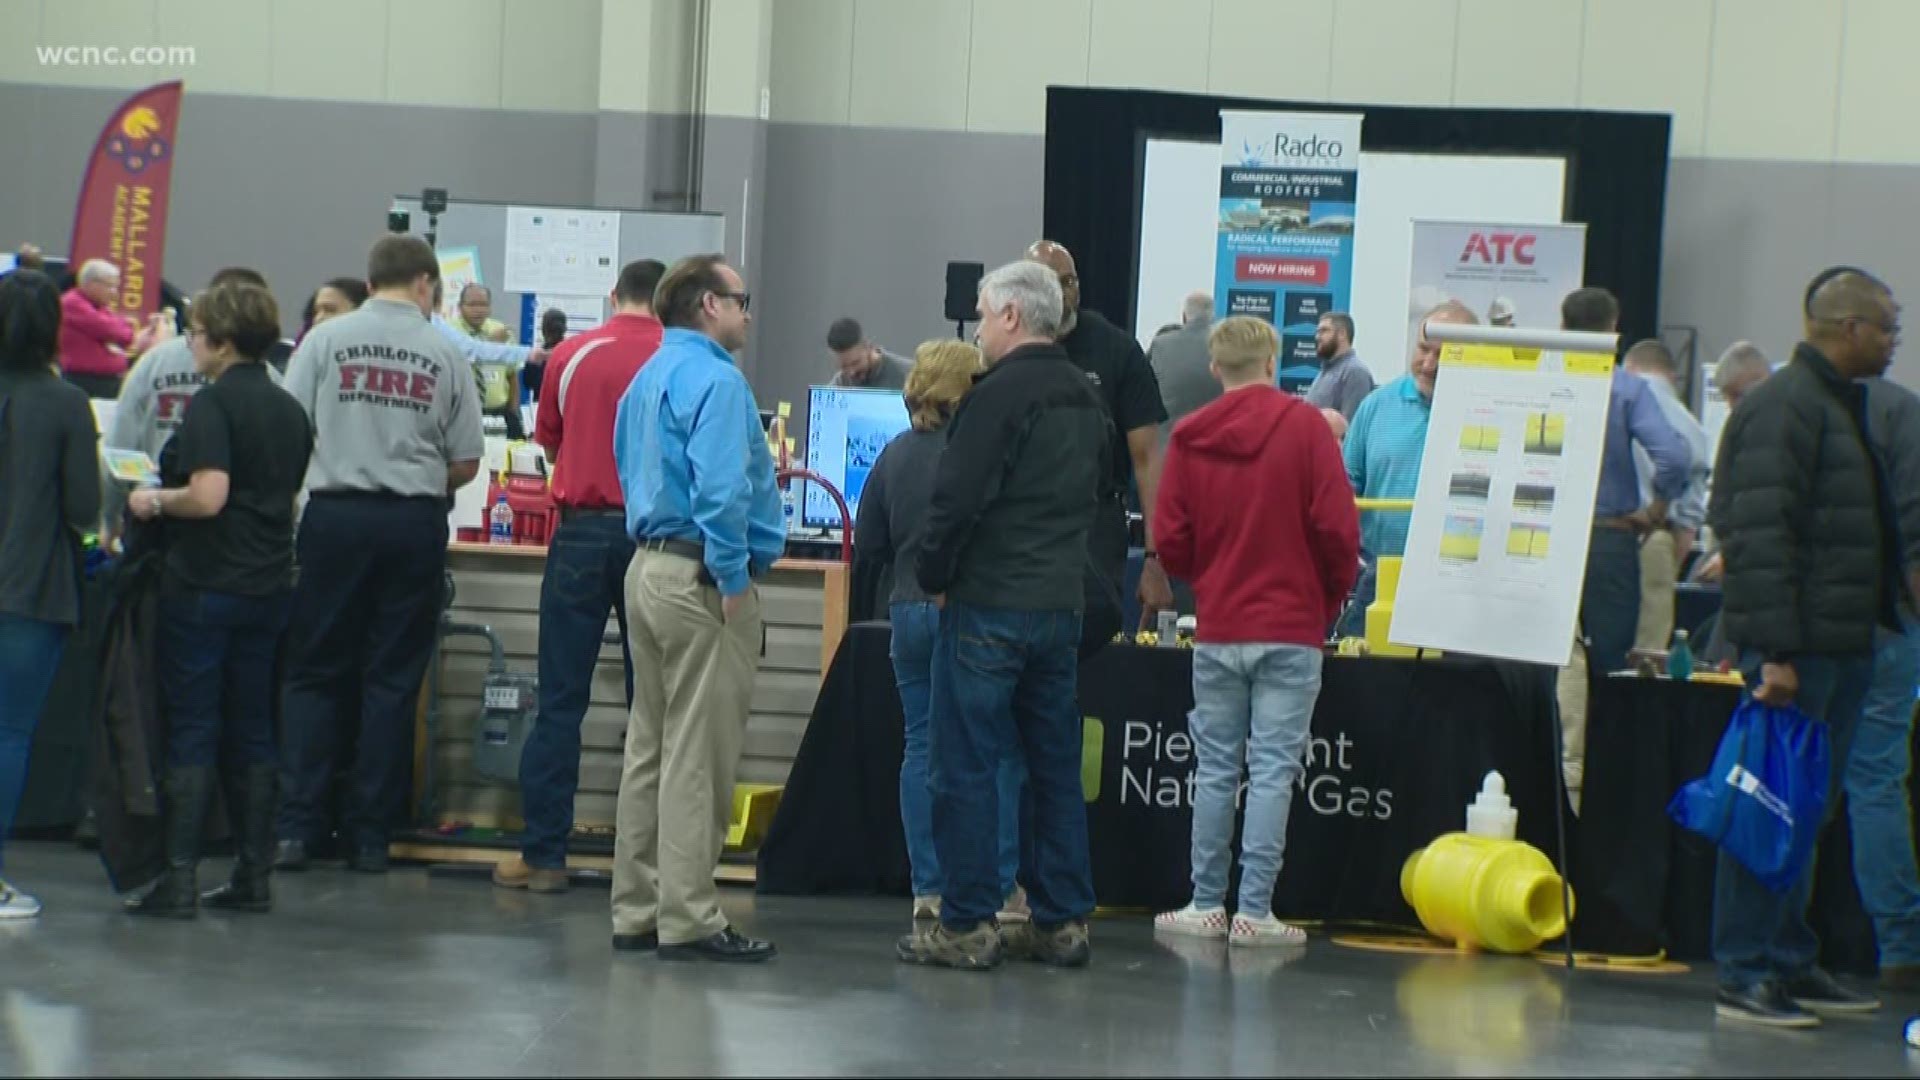 CMS hosted its second annual Career and Technical Education fair. Families were able to talk about CTE courses from computer science to culinary arts and meet Charlotte-area employers.